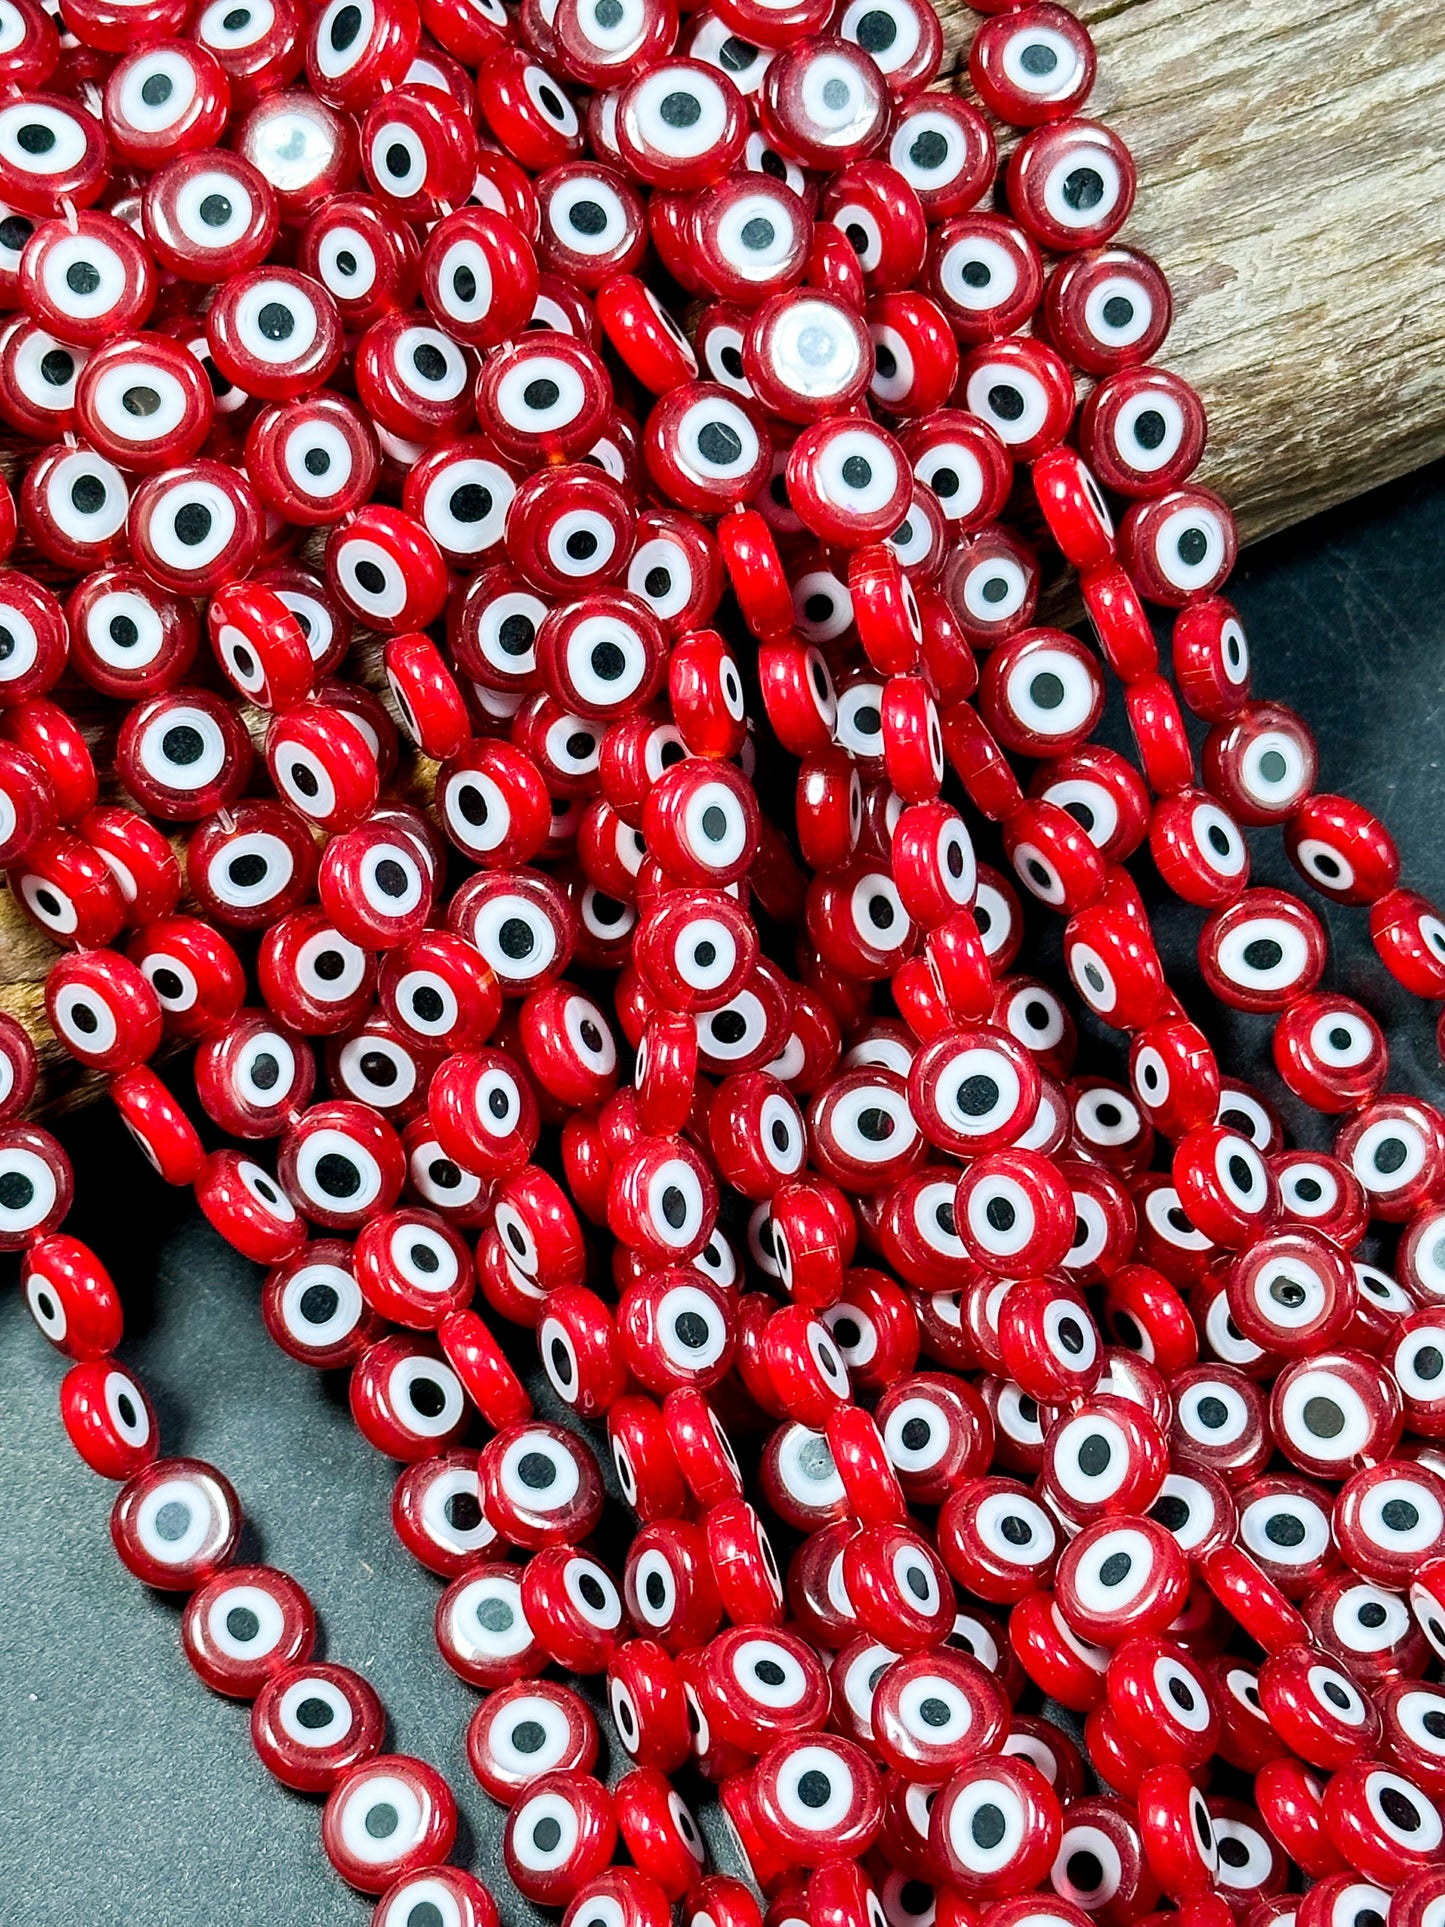 Beautiful Evil Eye Glass Beads 8mm 10mm Flat Coin Shape, Beautiful Dark Red Color Evil Eye Glass Beads, Religious Amulet Prayer Beads